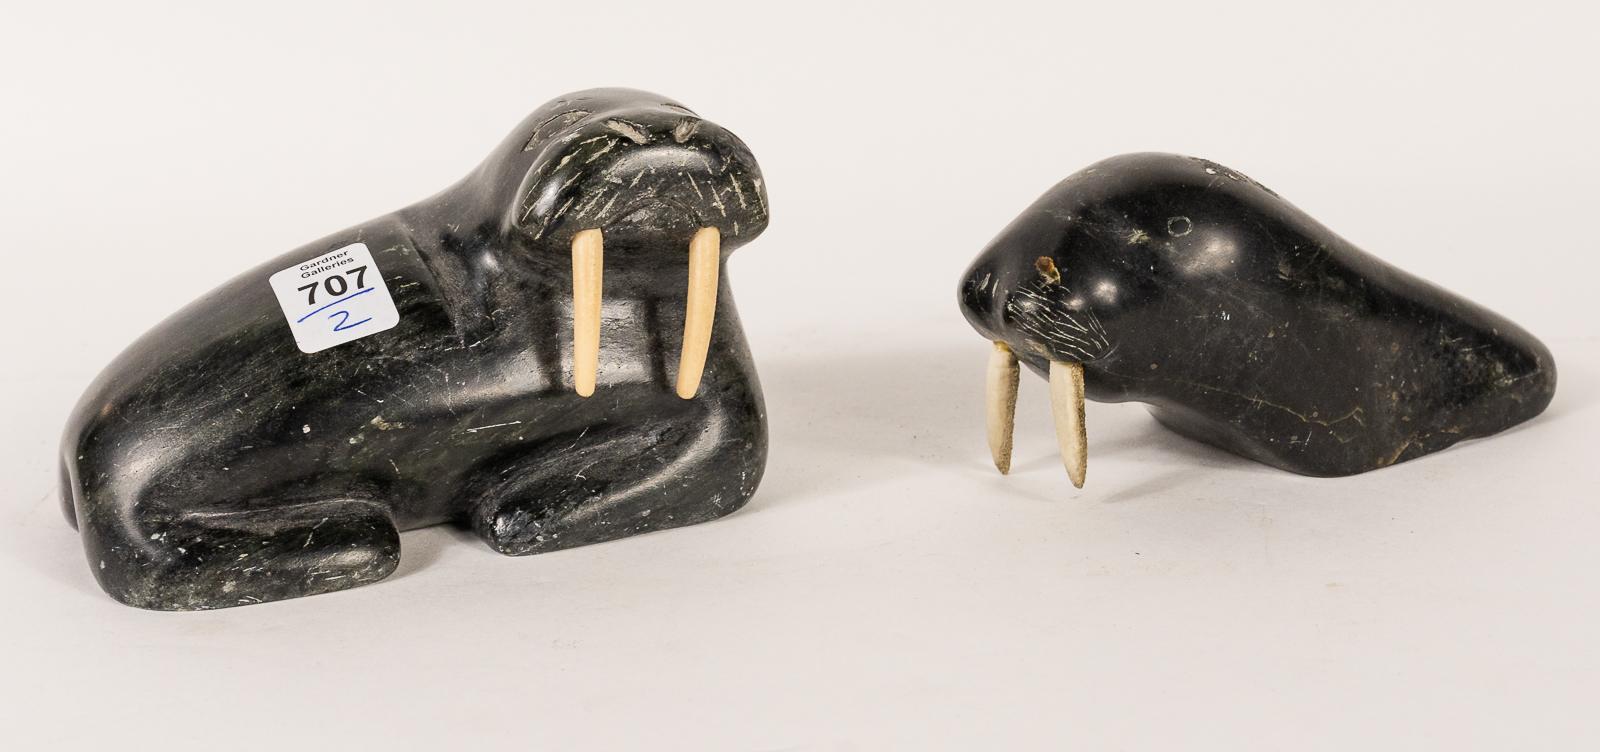 TWO INUIT SOAPSTONE "WALRUS" CARVINGS